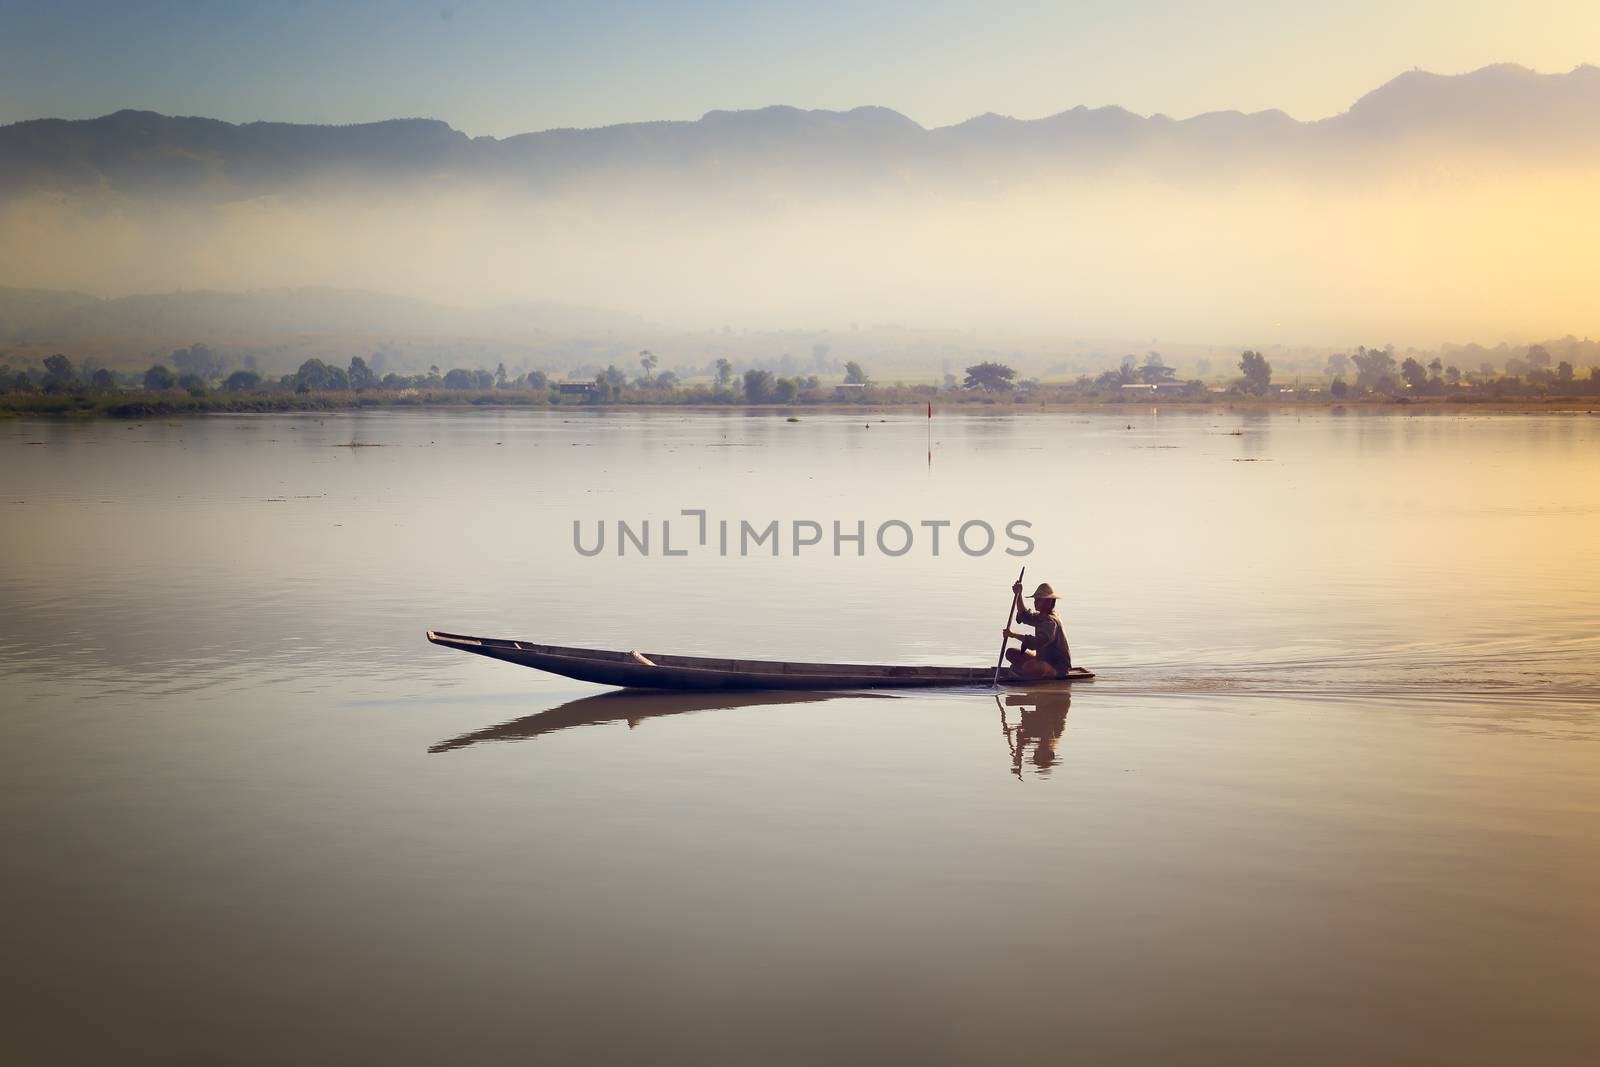 Mandalay, Myanmar - November 24, 2015: Fisherman fishing at sunrise in Myanmar.
Fishing makes up a fair portion of Burma's food production. Fishing occurs in both salt and freshwater, and it is estimated that there are up to 300 species in the Burmese fresh waters.